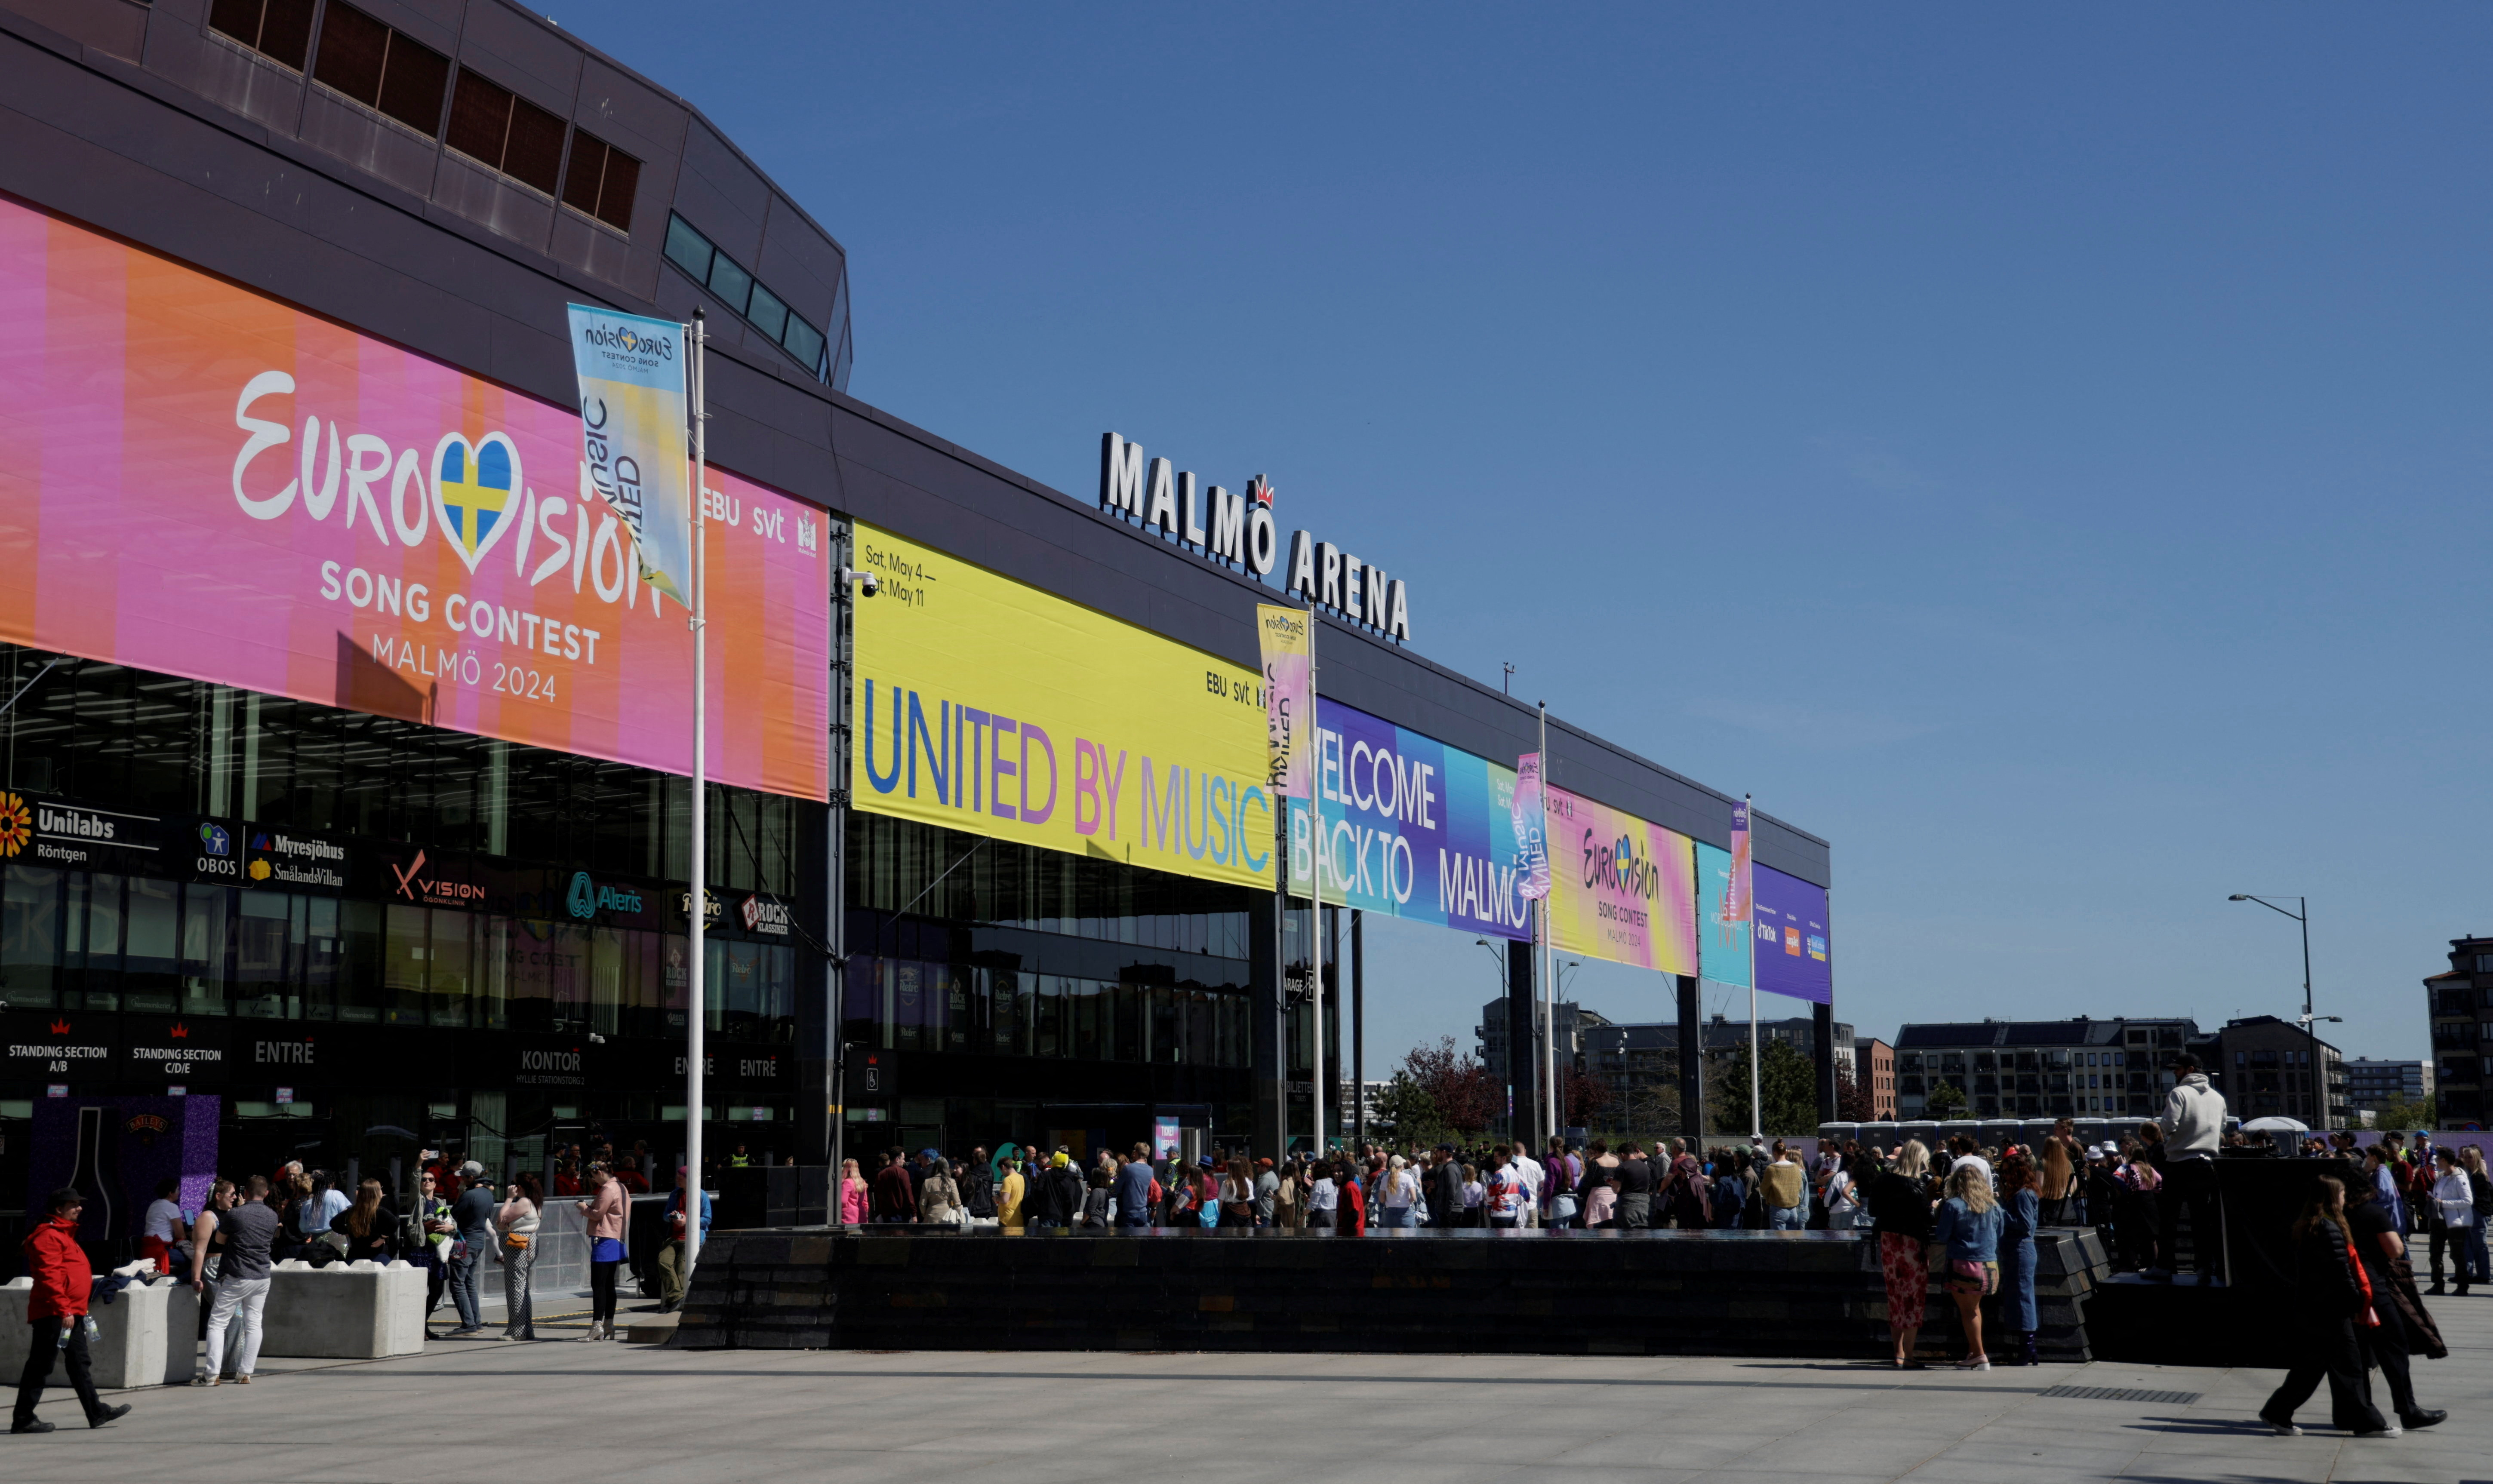 Fans queue for a dress rehearsal for the Eurovision Song Contest outside the Malmo Arena